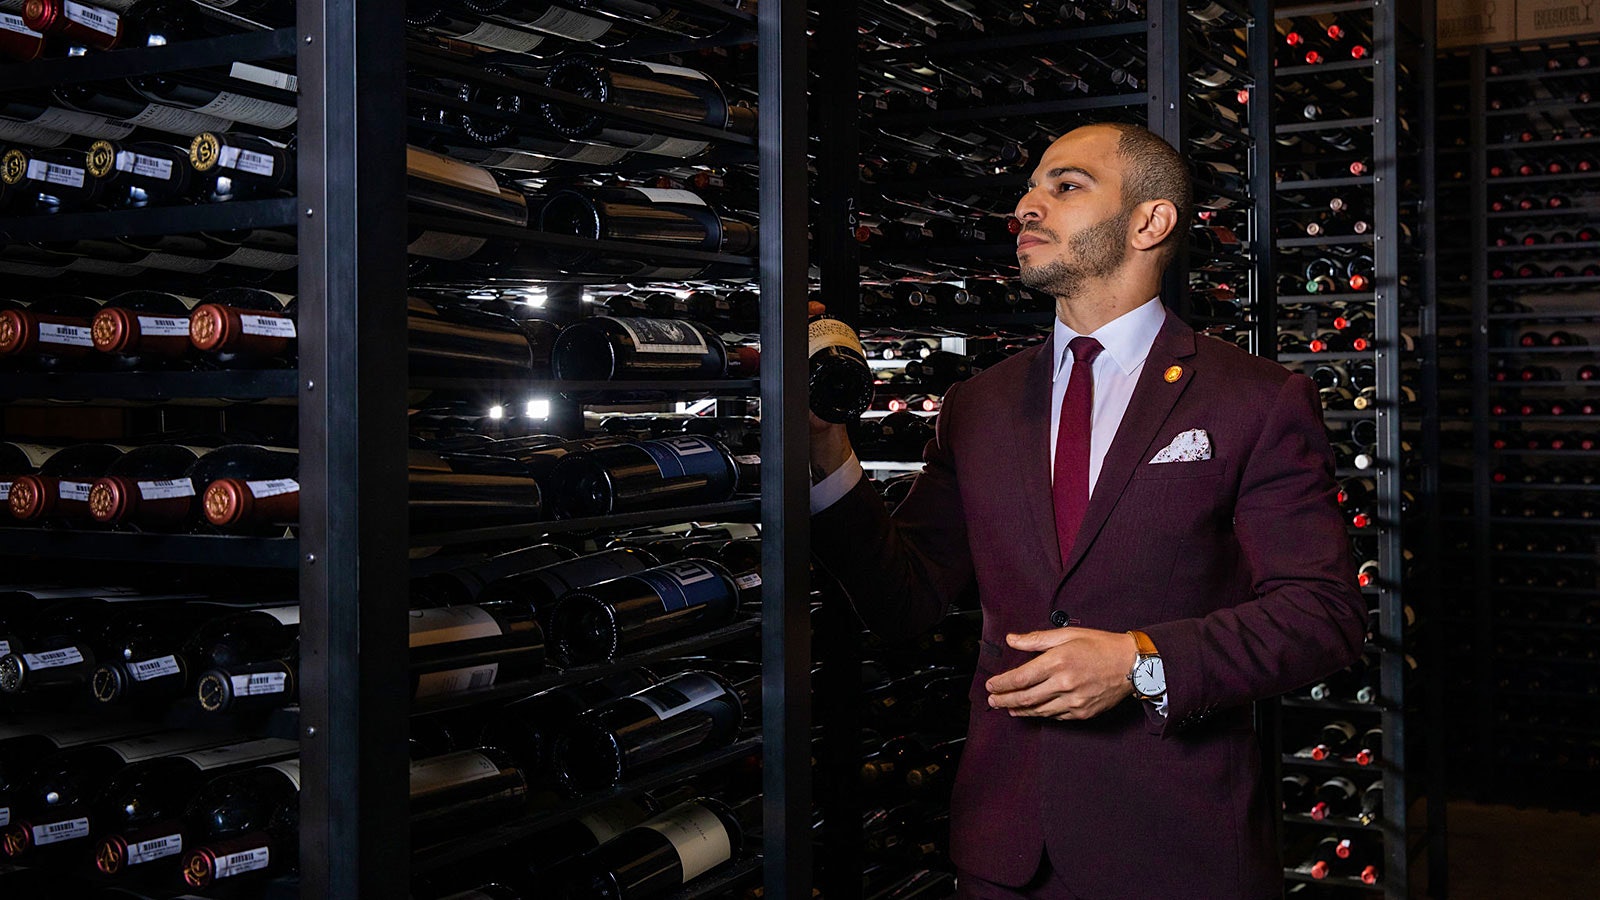  Vincent Morrow in the wine cellar at Press Restaurant 